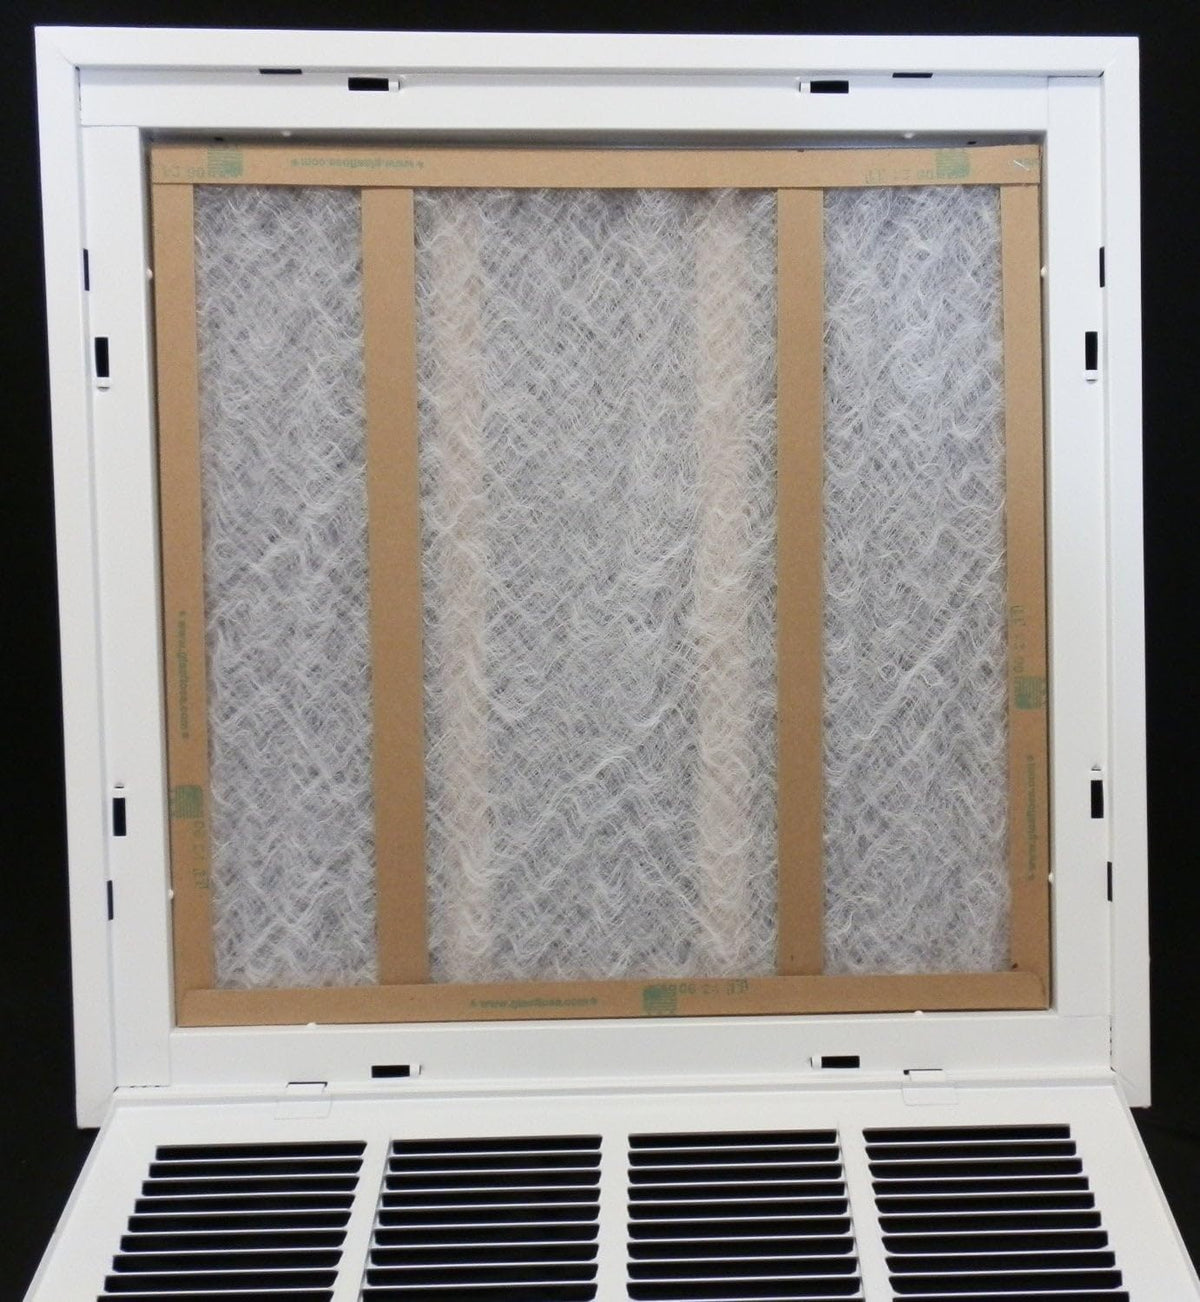 8&quot; X 8&quot; Steel Return Air Filter Grille for 1&quot; Filter - Fixed Hinged - [Outer Dimensions: 10 5/8&quot; X 10 5/8&quot;]